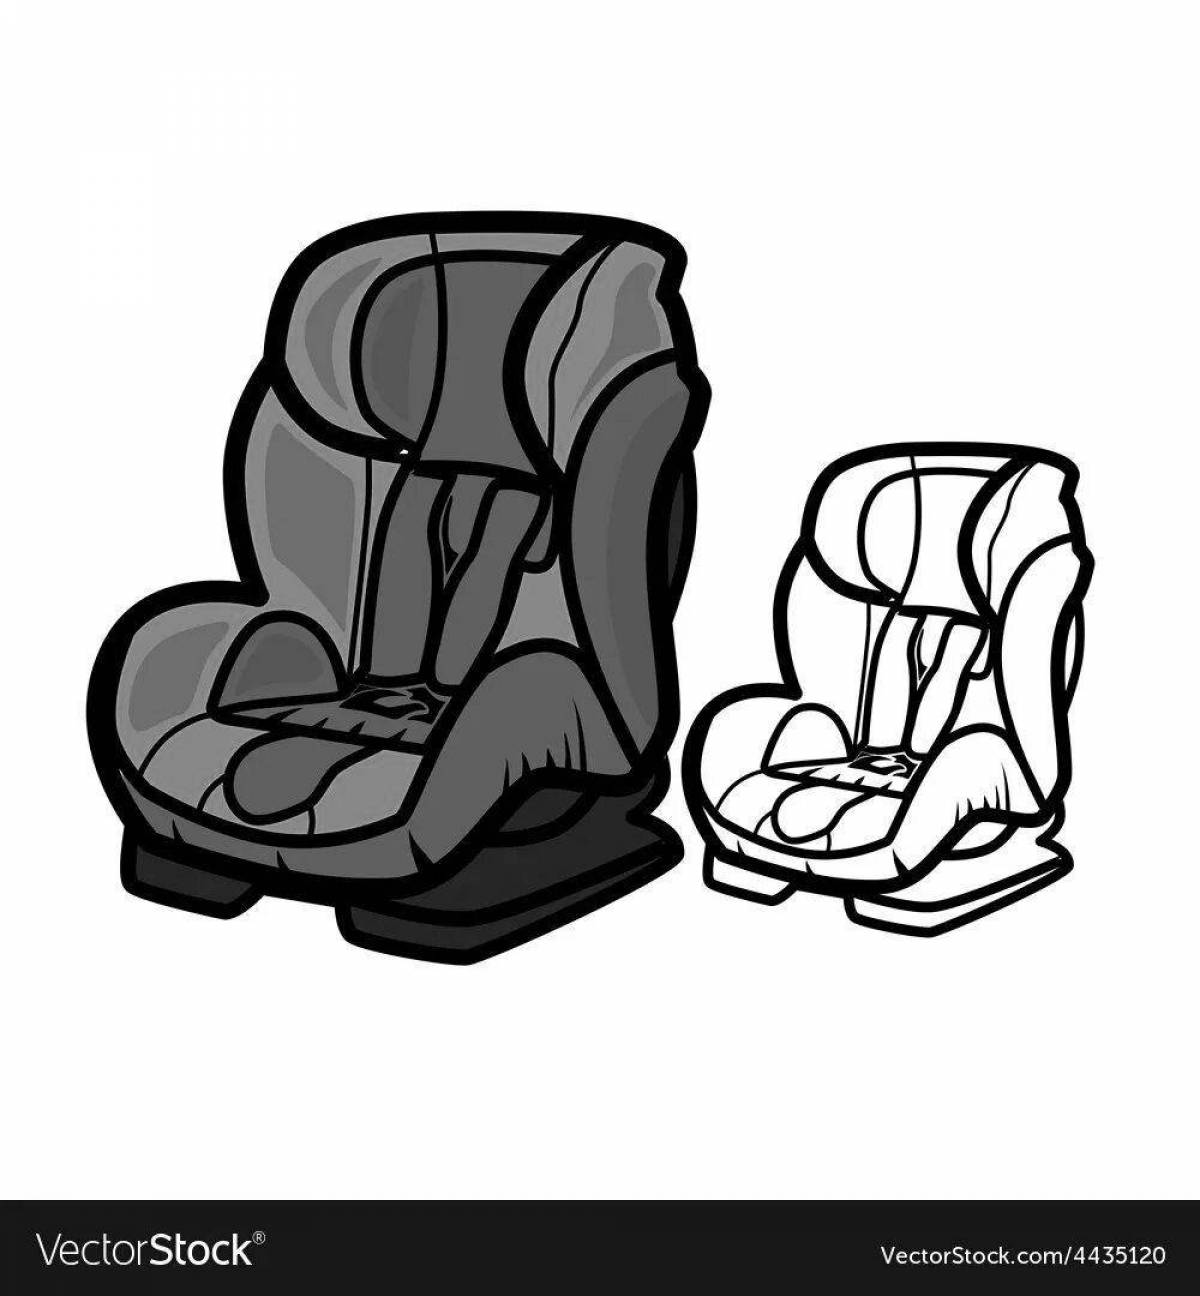 Grinning baby in a car seat